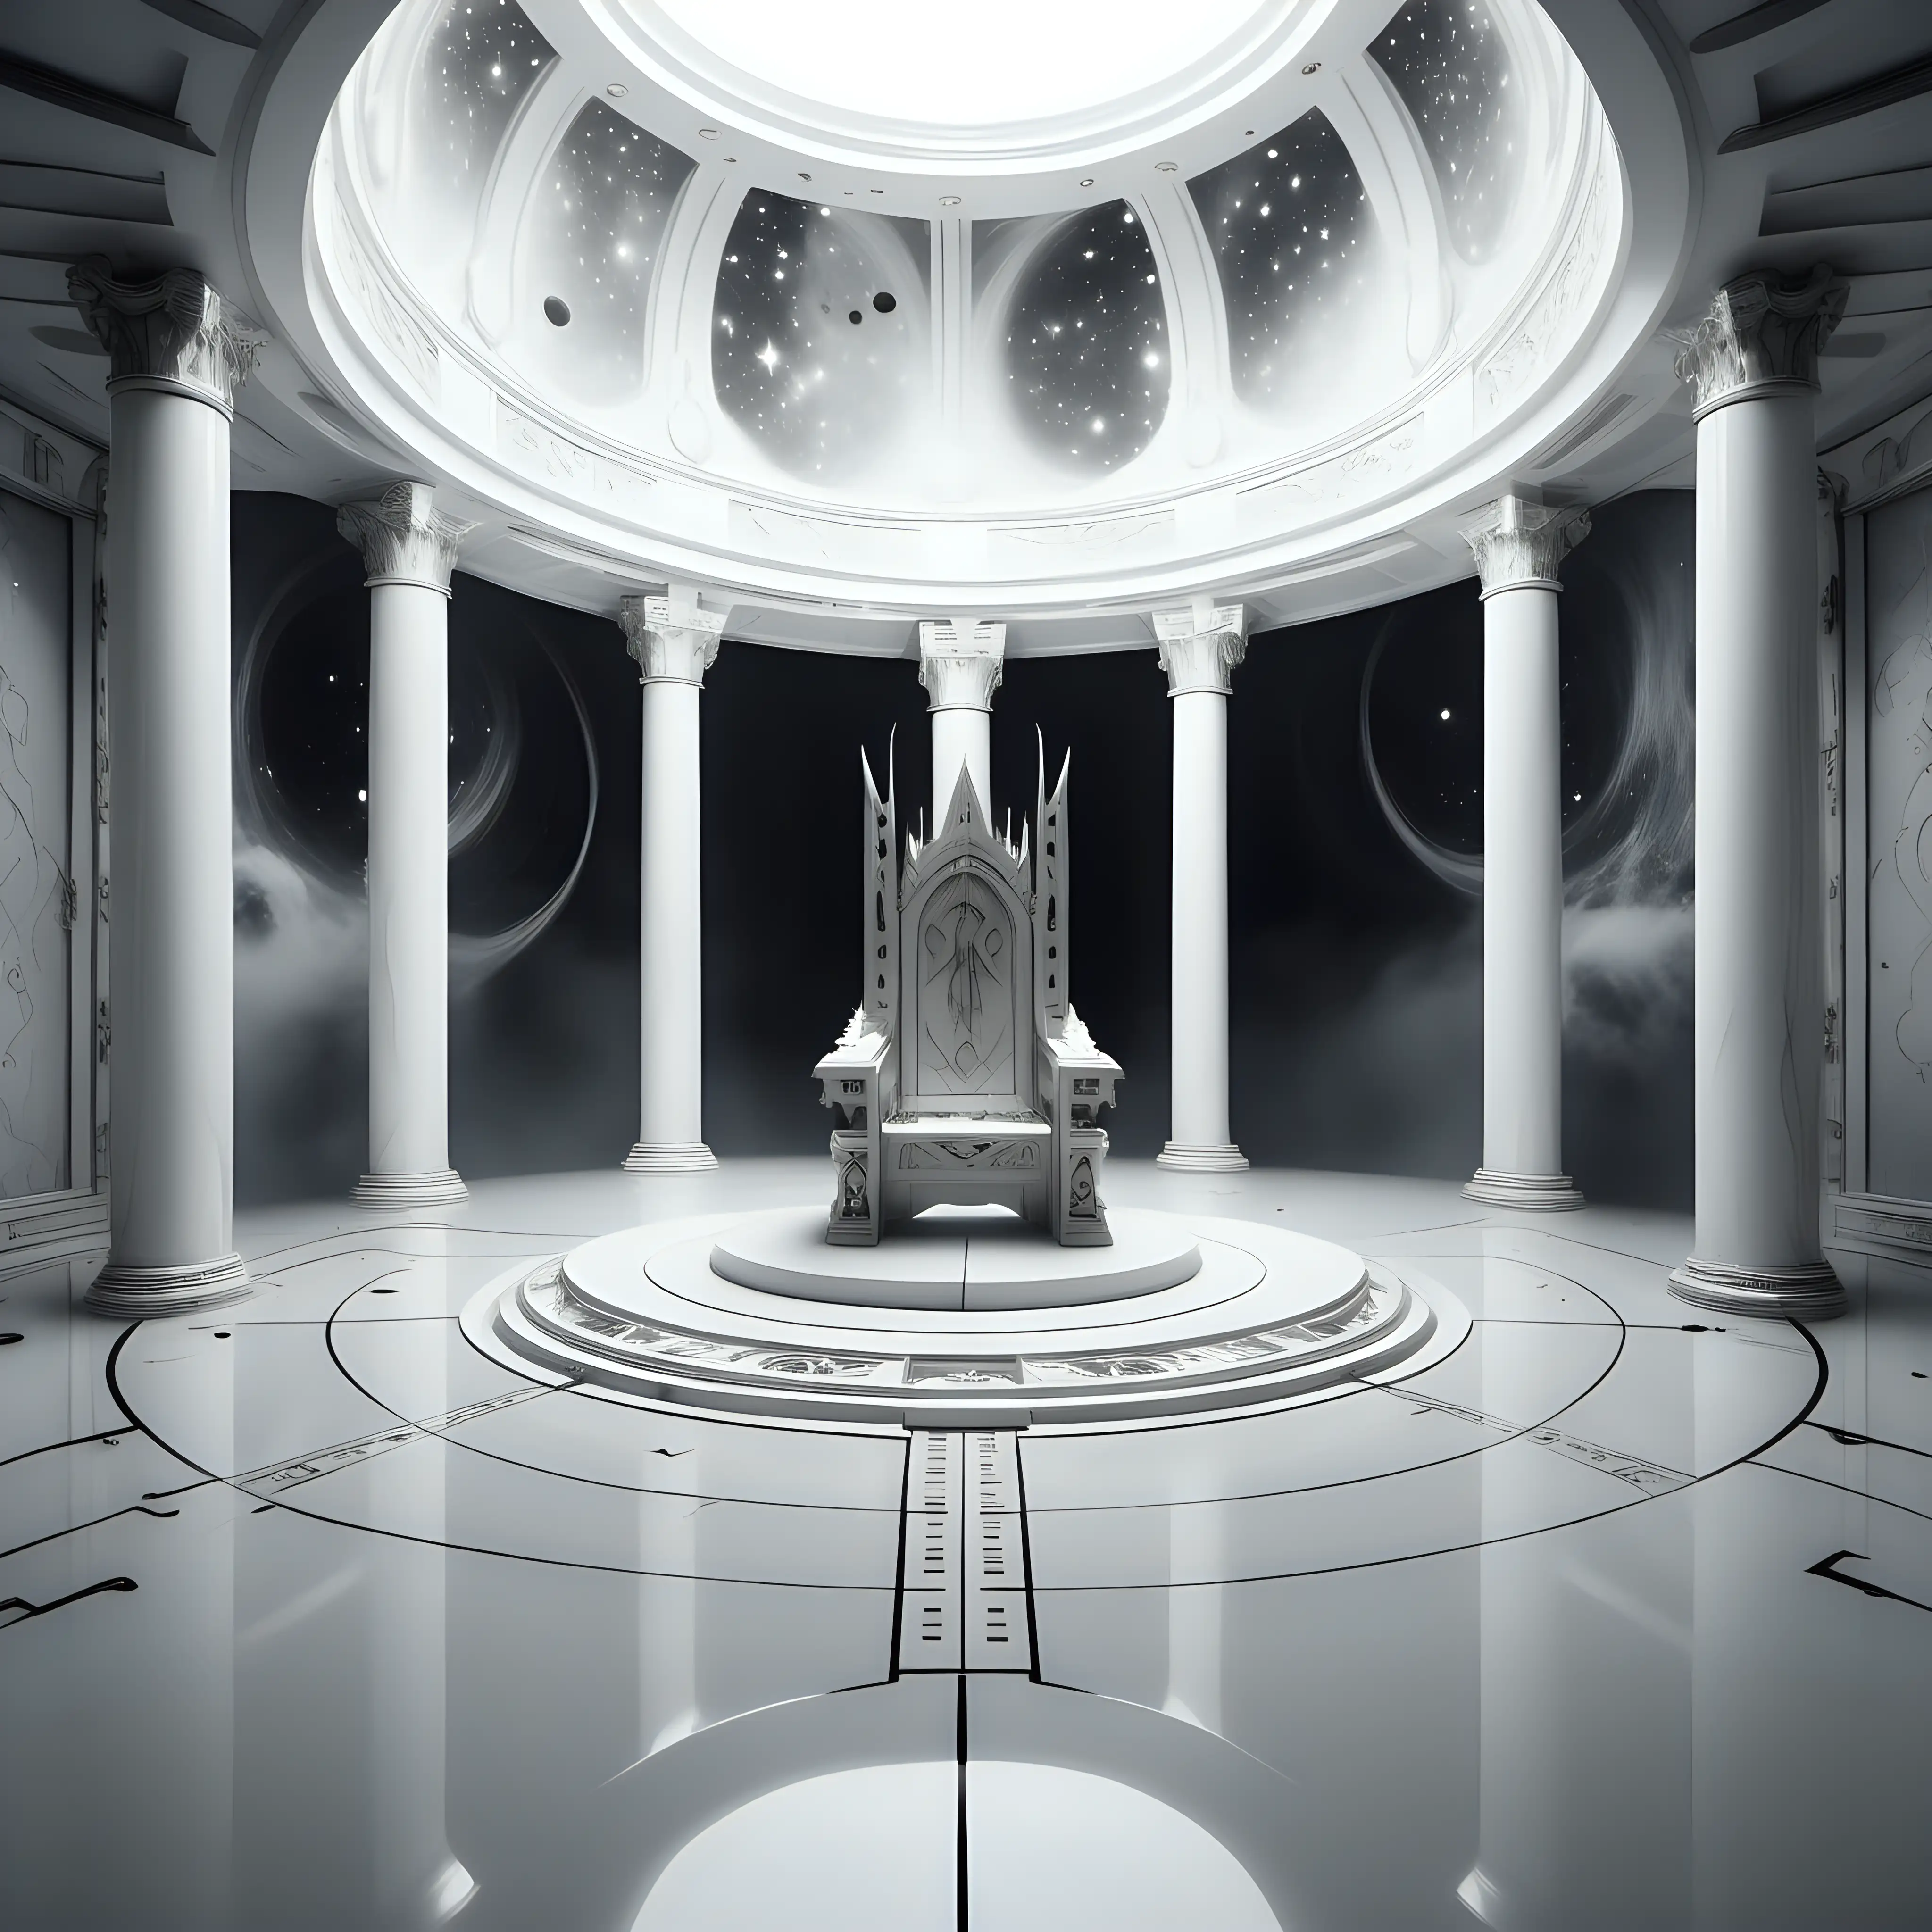 Epic Astrological Heavenly Throne Room with Void in OffWhite Theme